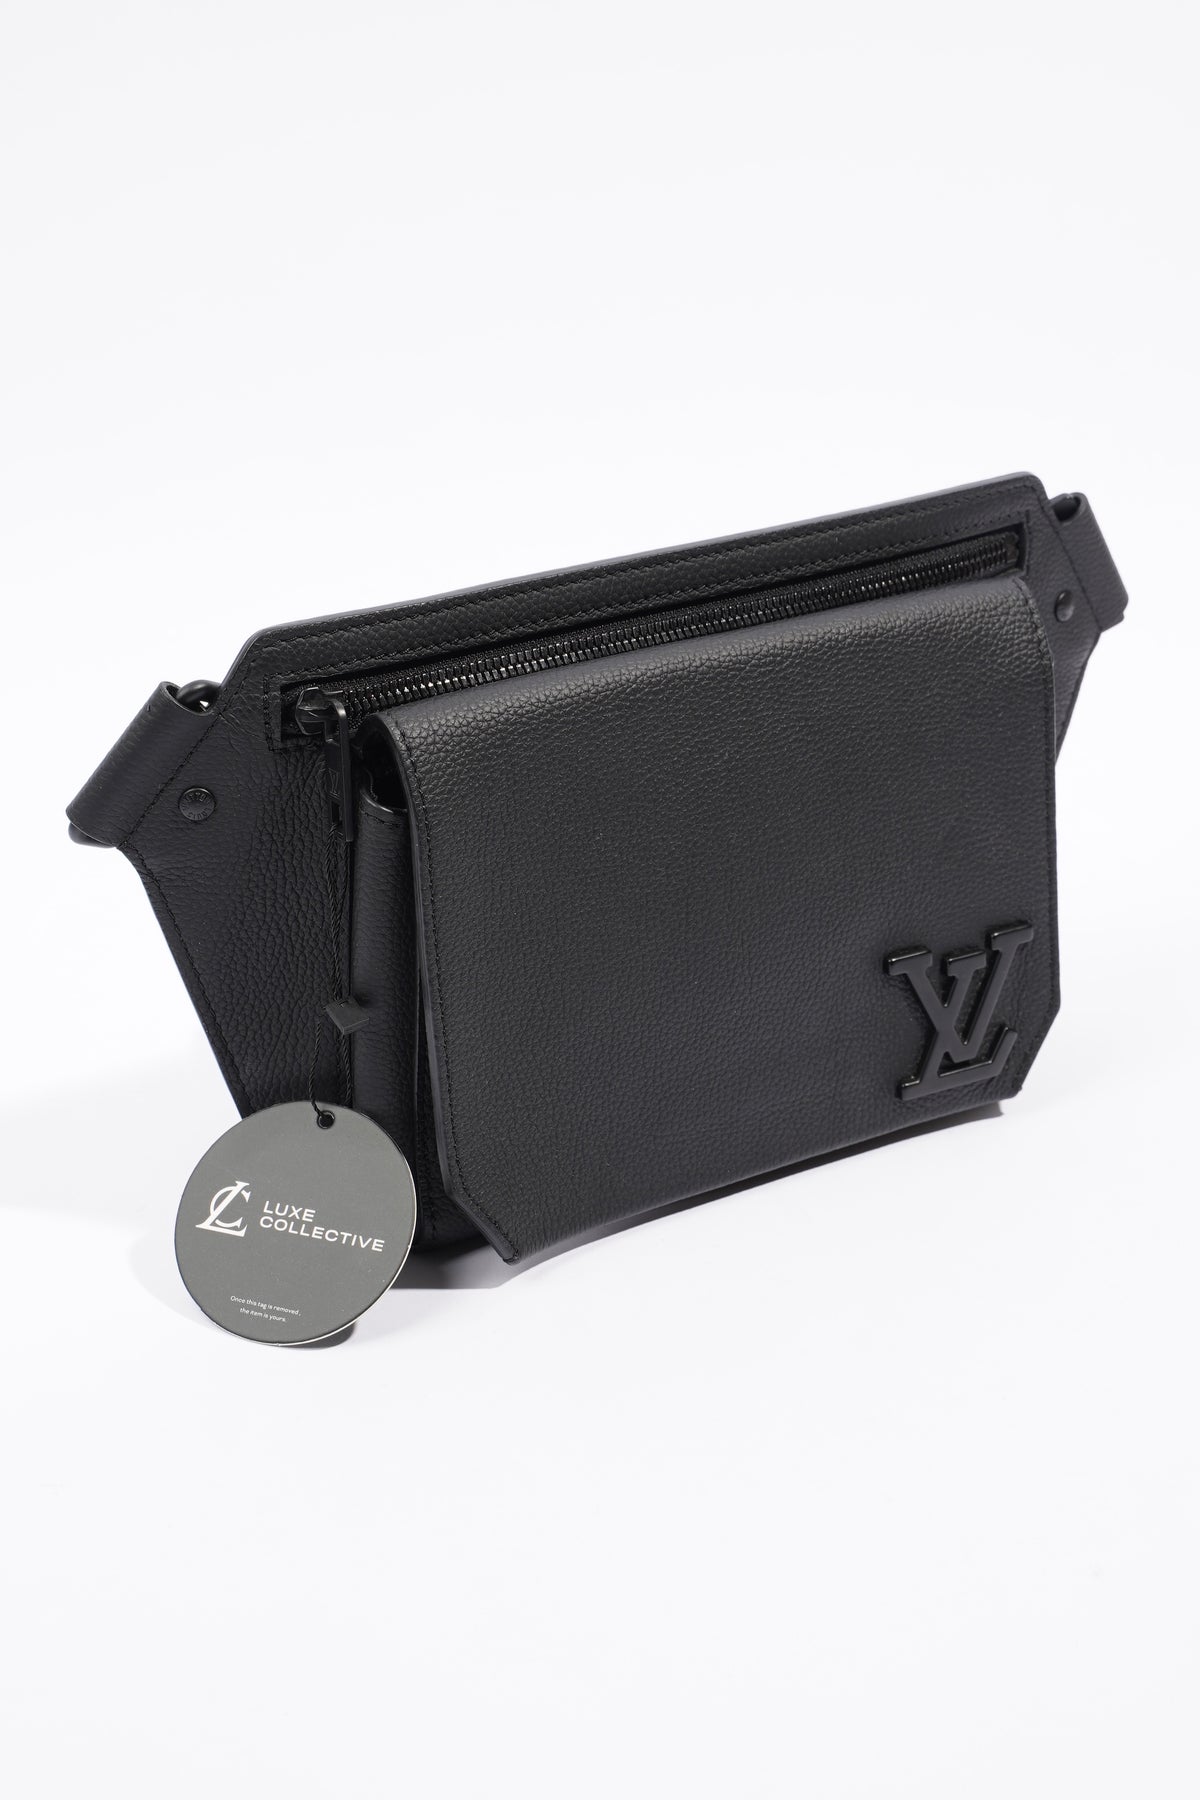 Louis Vuitton Aerogram Takeoff Sling Bum Bag Black Leather – Luxe Collective